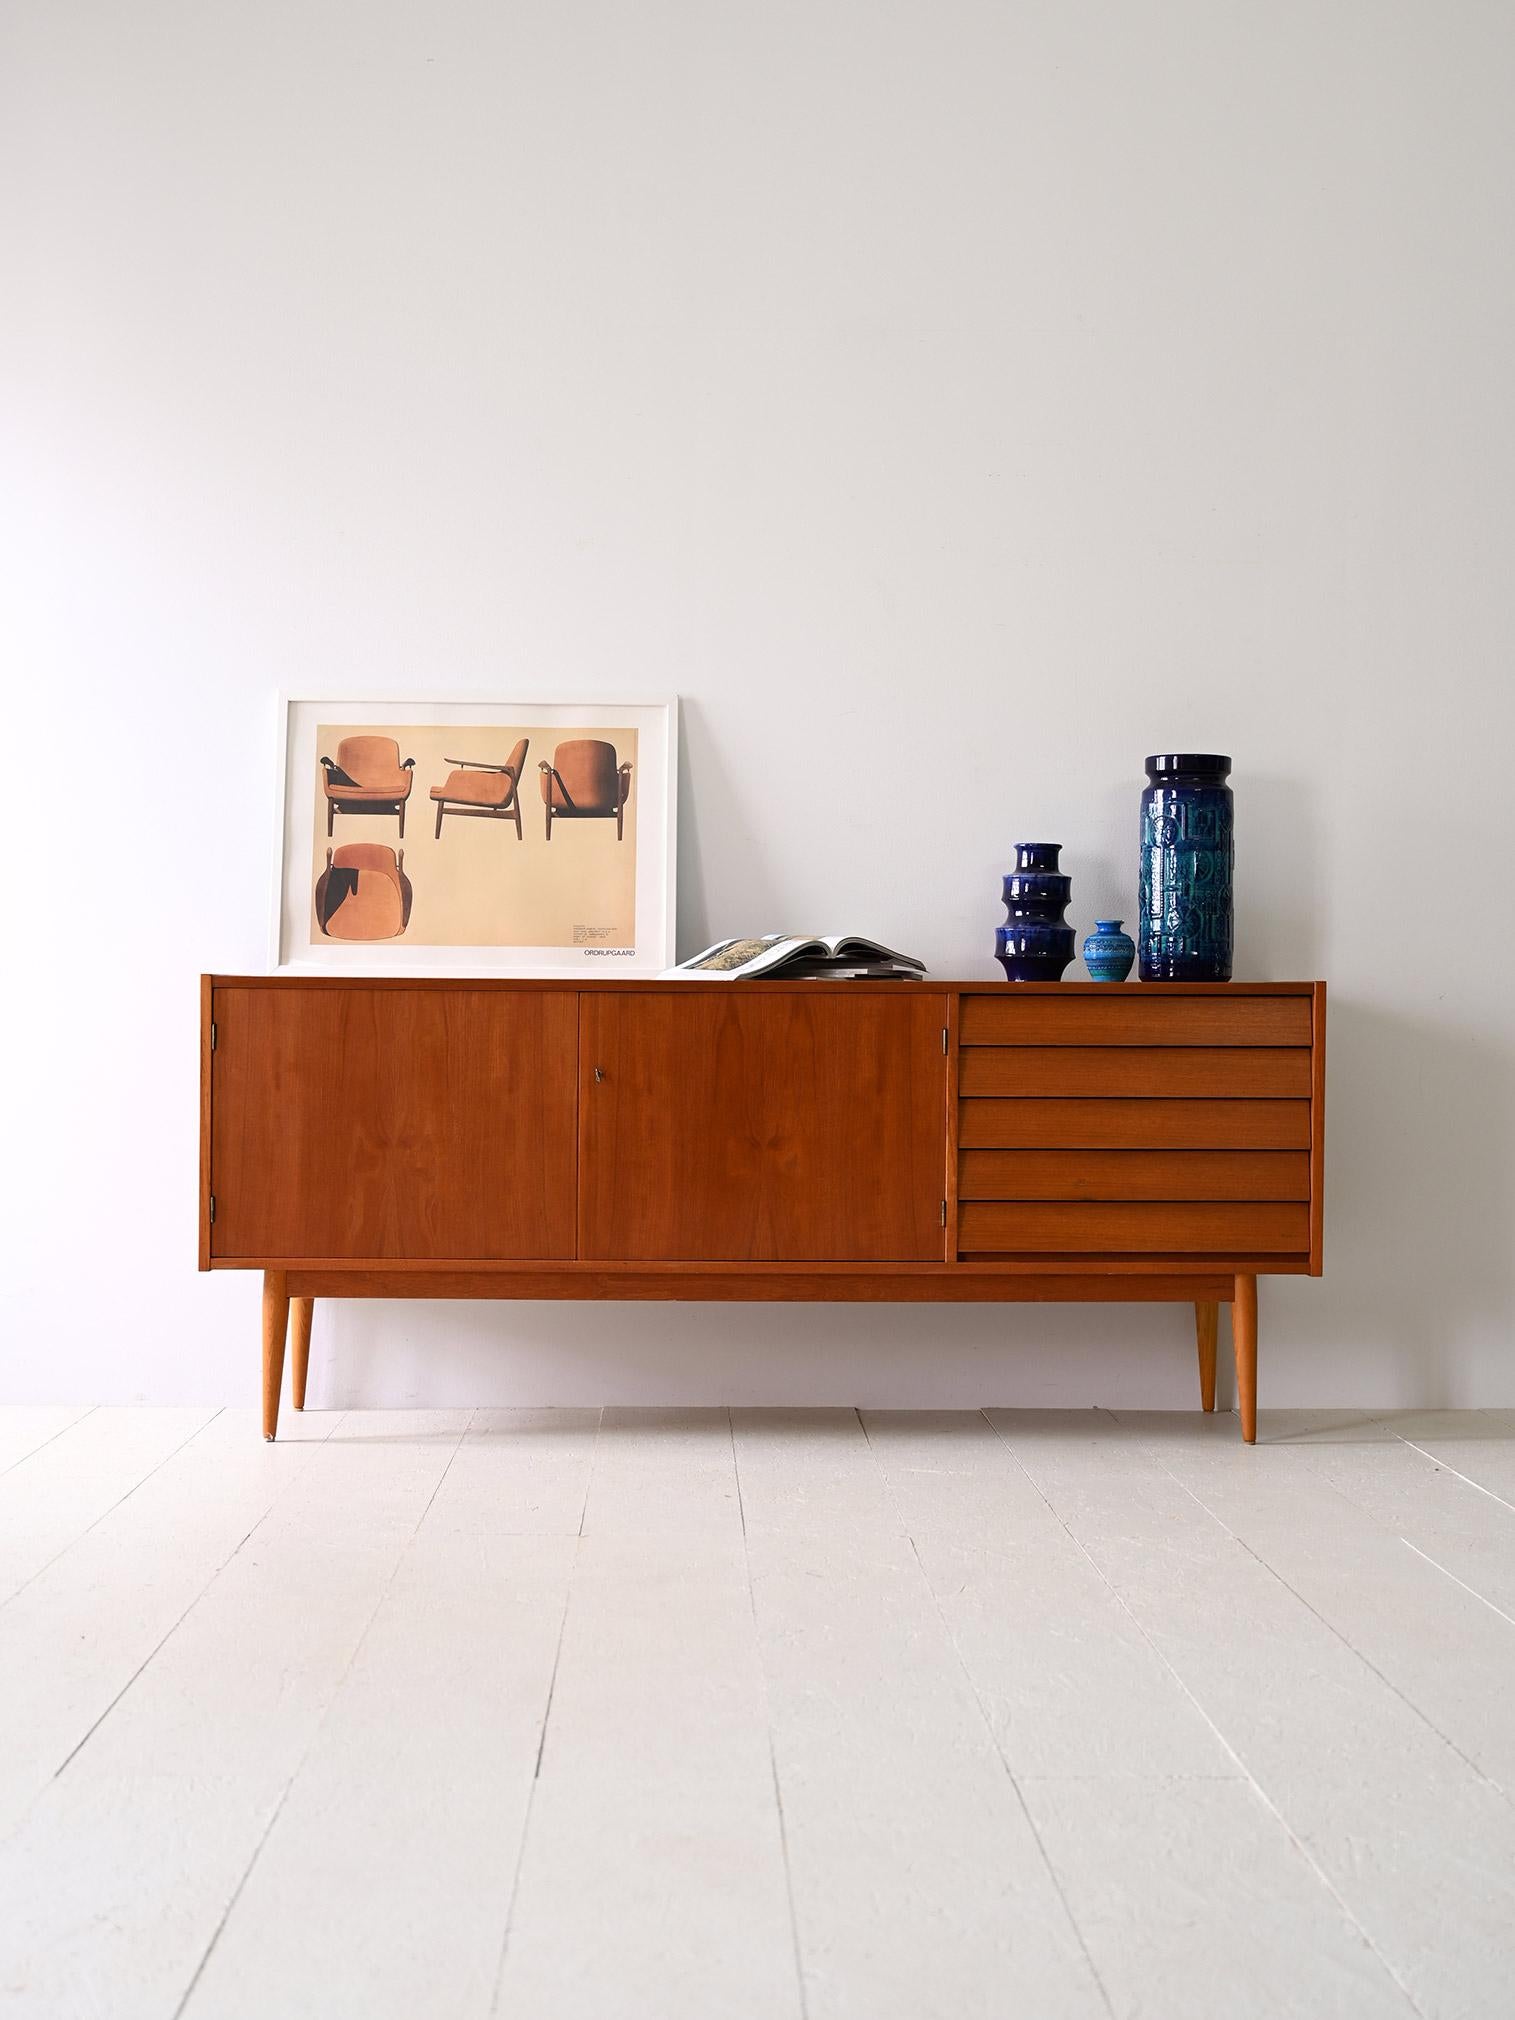 Scandinavian sideboard in original vintage teak.

This teak sideboard is an icon of elegance and simplicity, ideal for any room in your home. With five drawers placed on the right side and large hinged doors on the left side, it offers practical